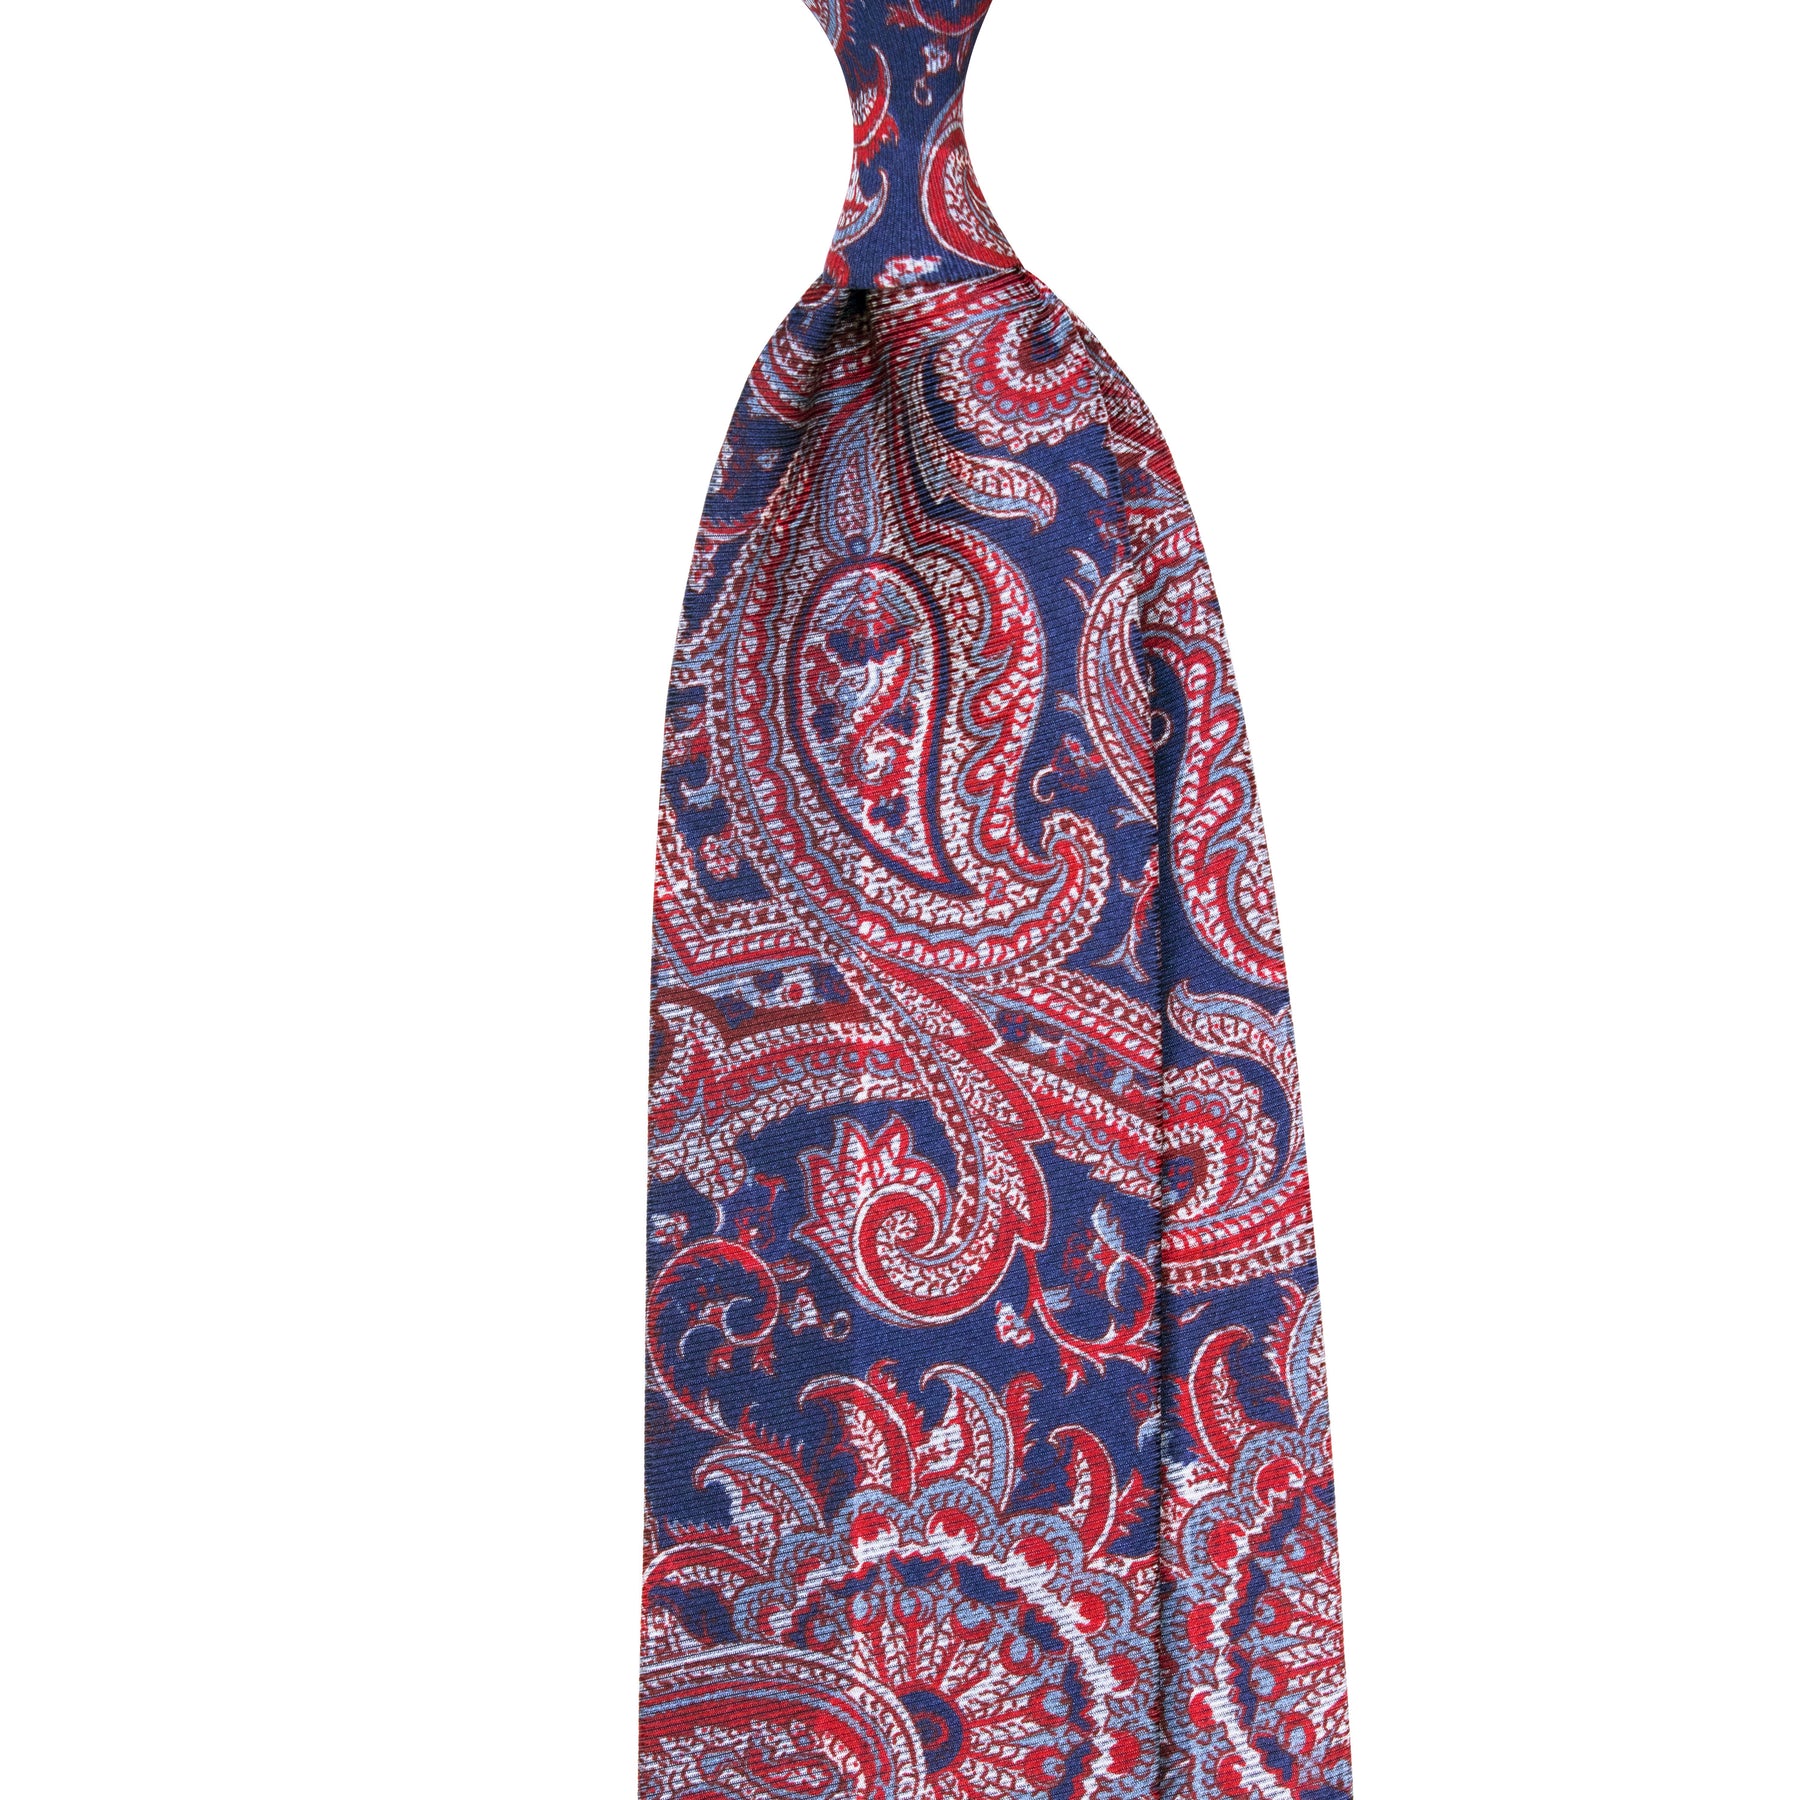 ALL OVER PAISLEY DOUBLE-FACE PRINTED TIE                                                     SKU: SS.DF.15.D